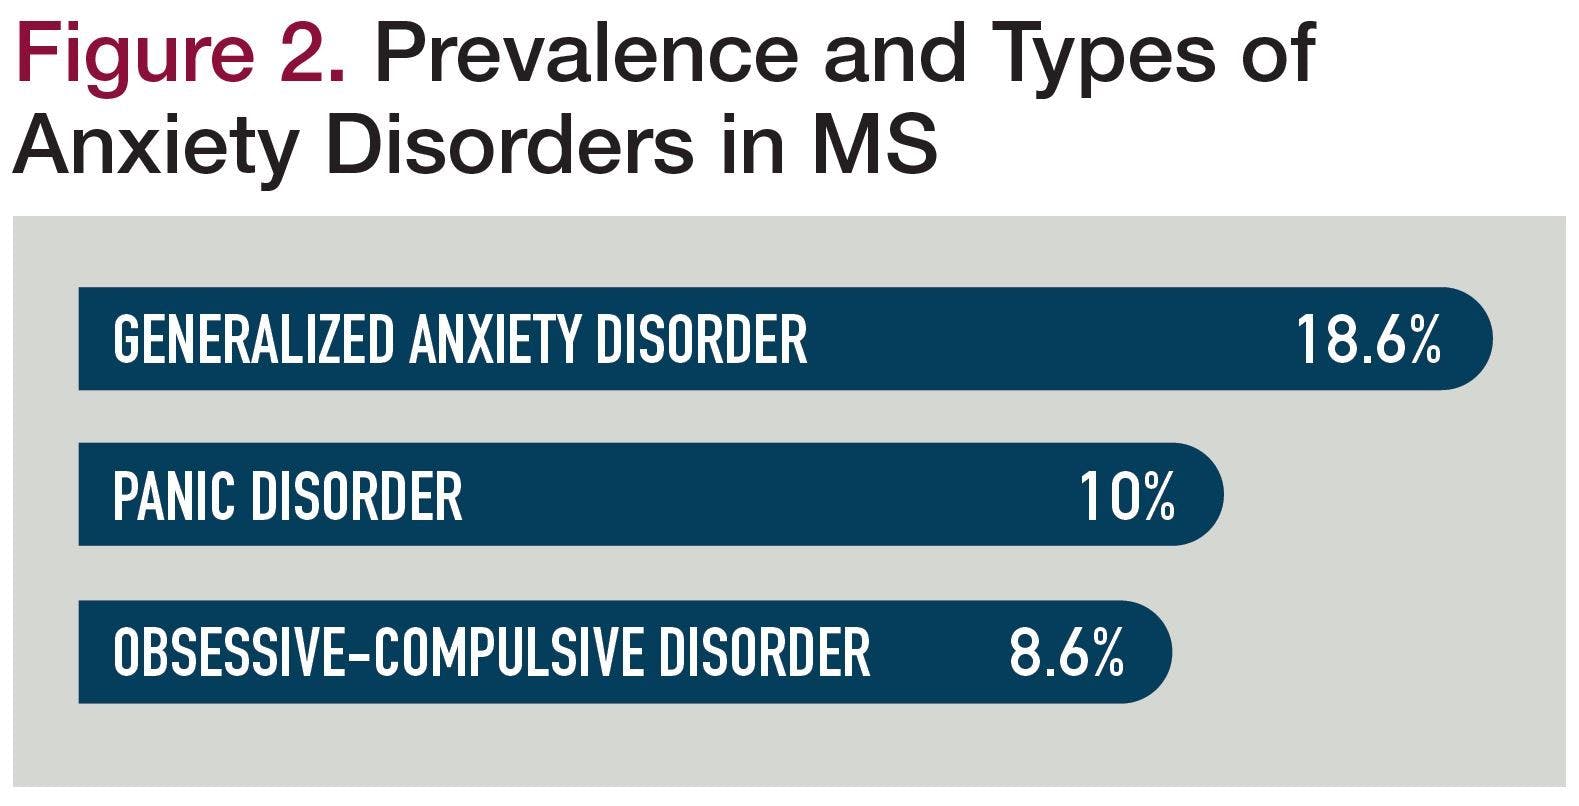 Figure 2. Prevalence and Types of Anxiety Disorders in MS